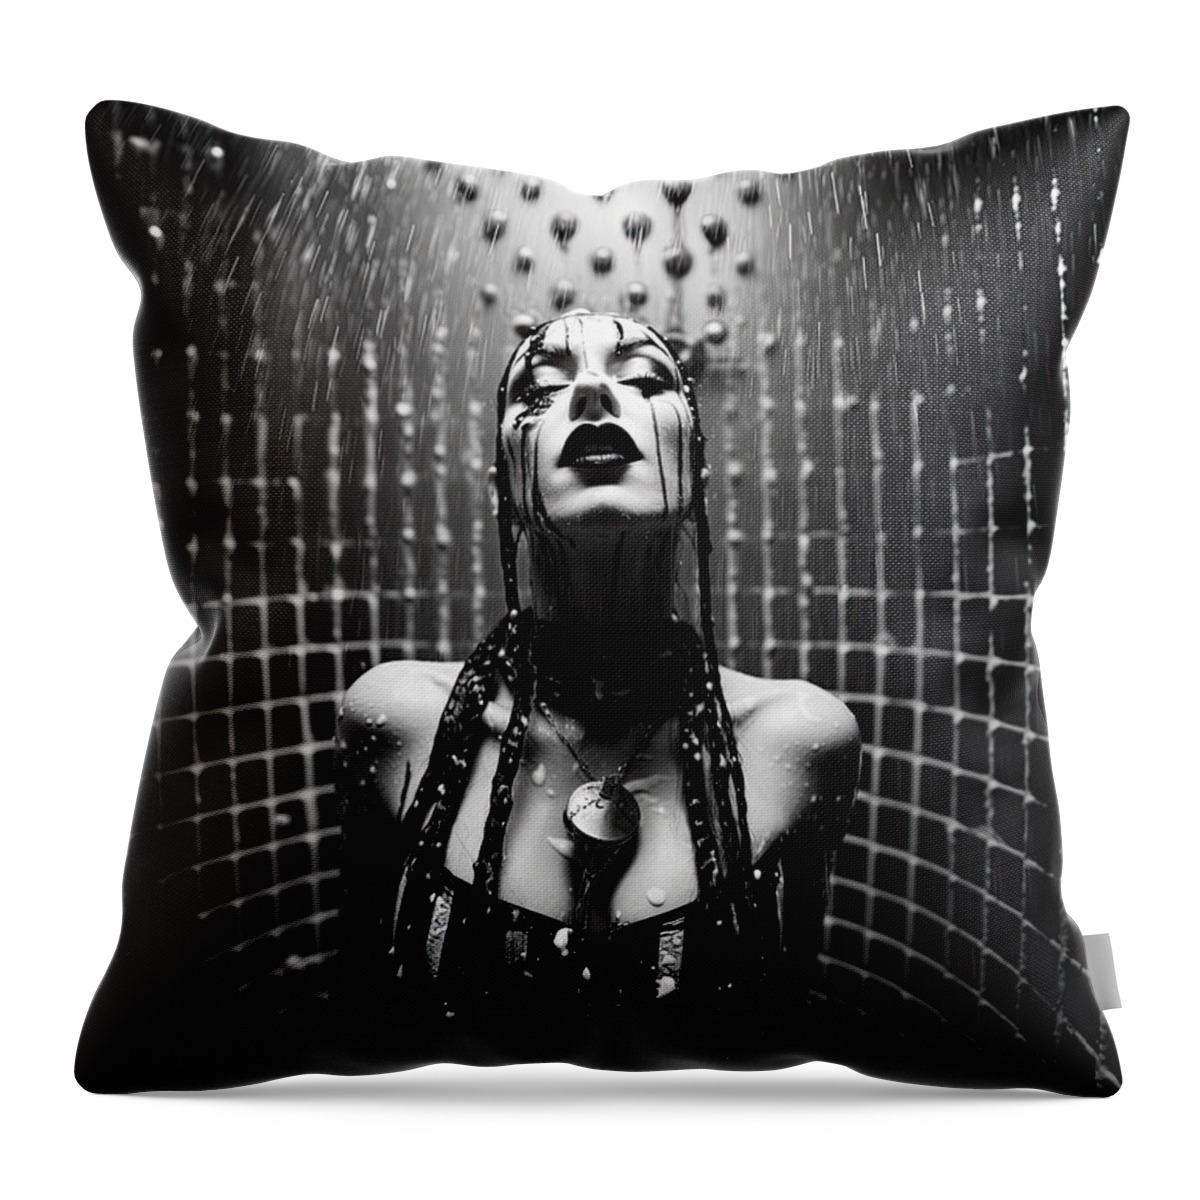 Erotic Throw Pillow featuring the photograph Erotic Shower No.1 by My Head Cinema